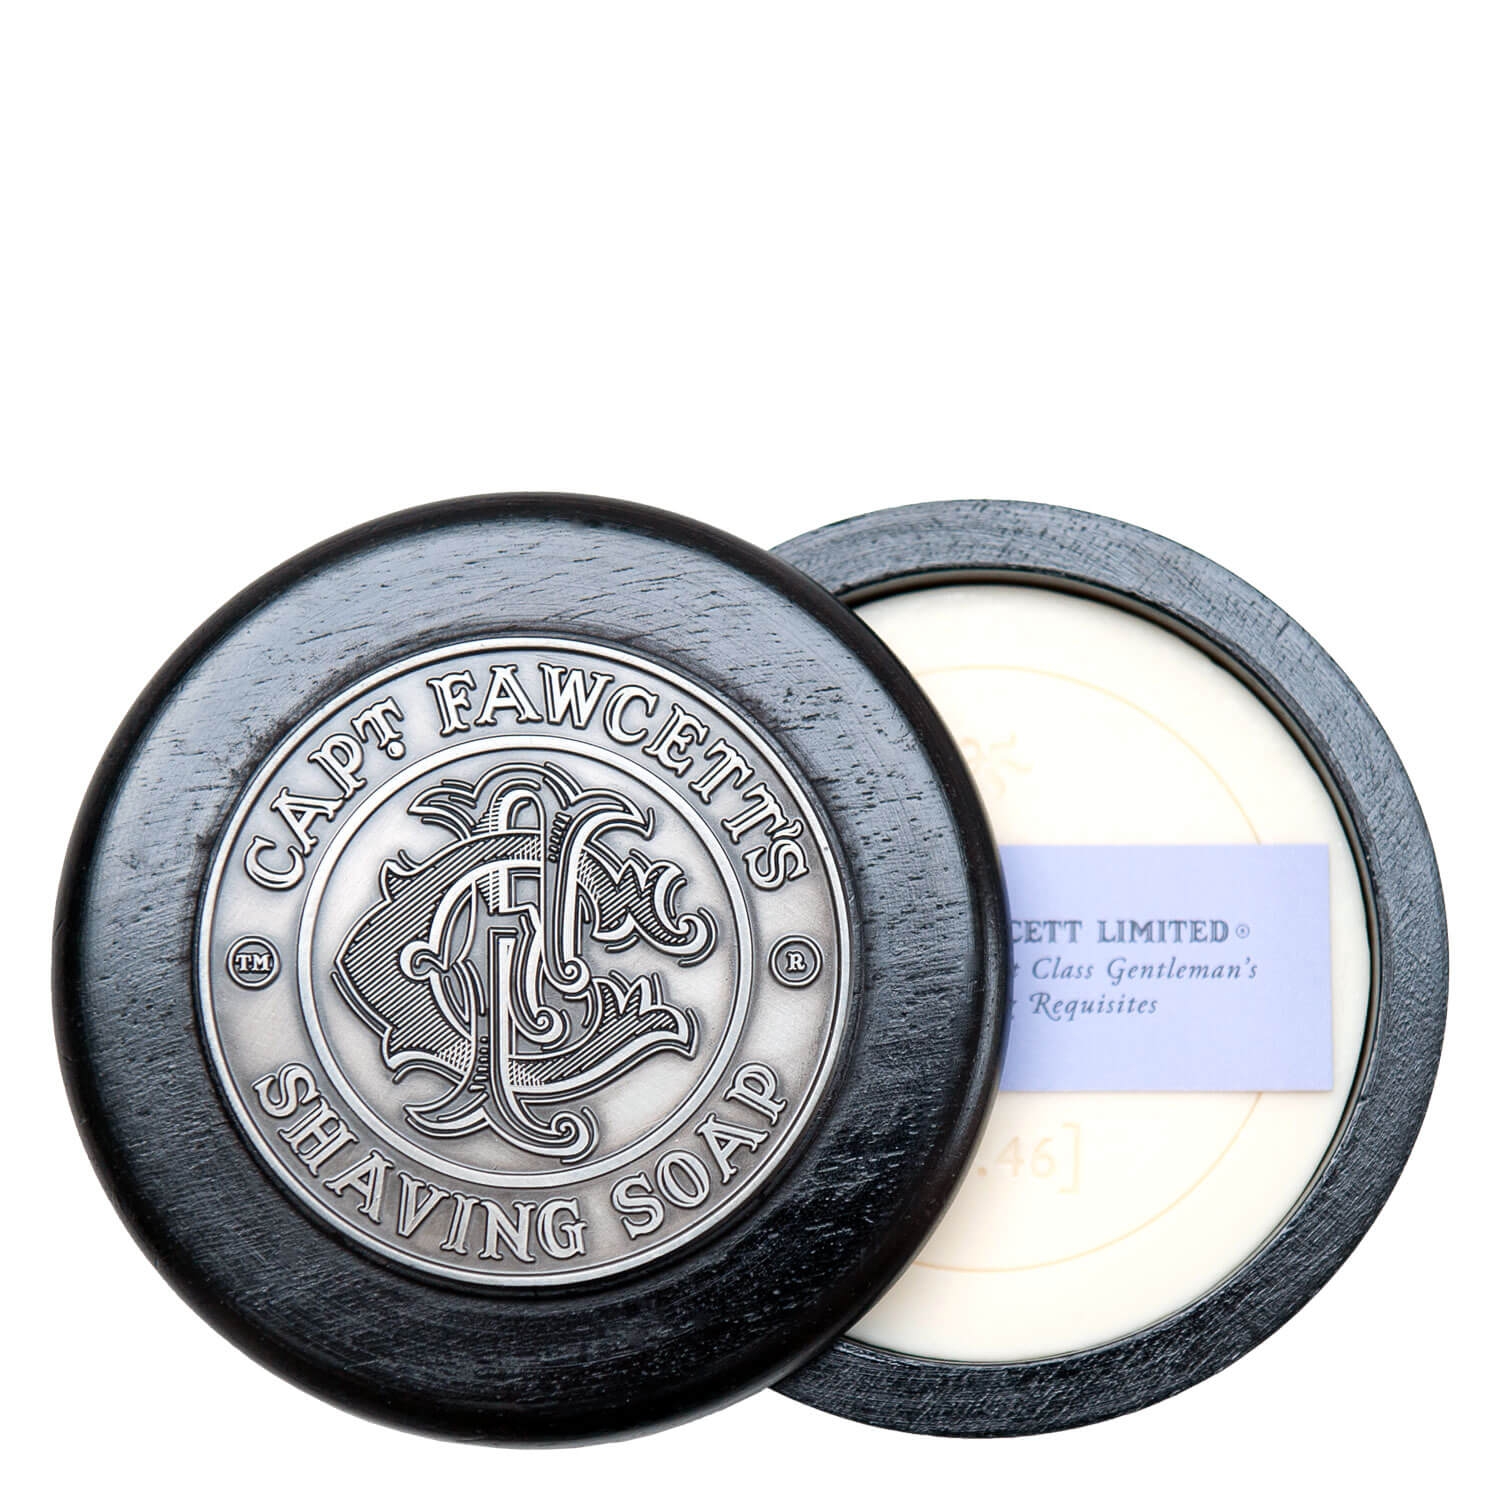 Product image from Capt. Fawcett Care - Luxury Shaving Soap